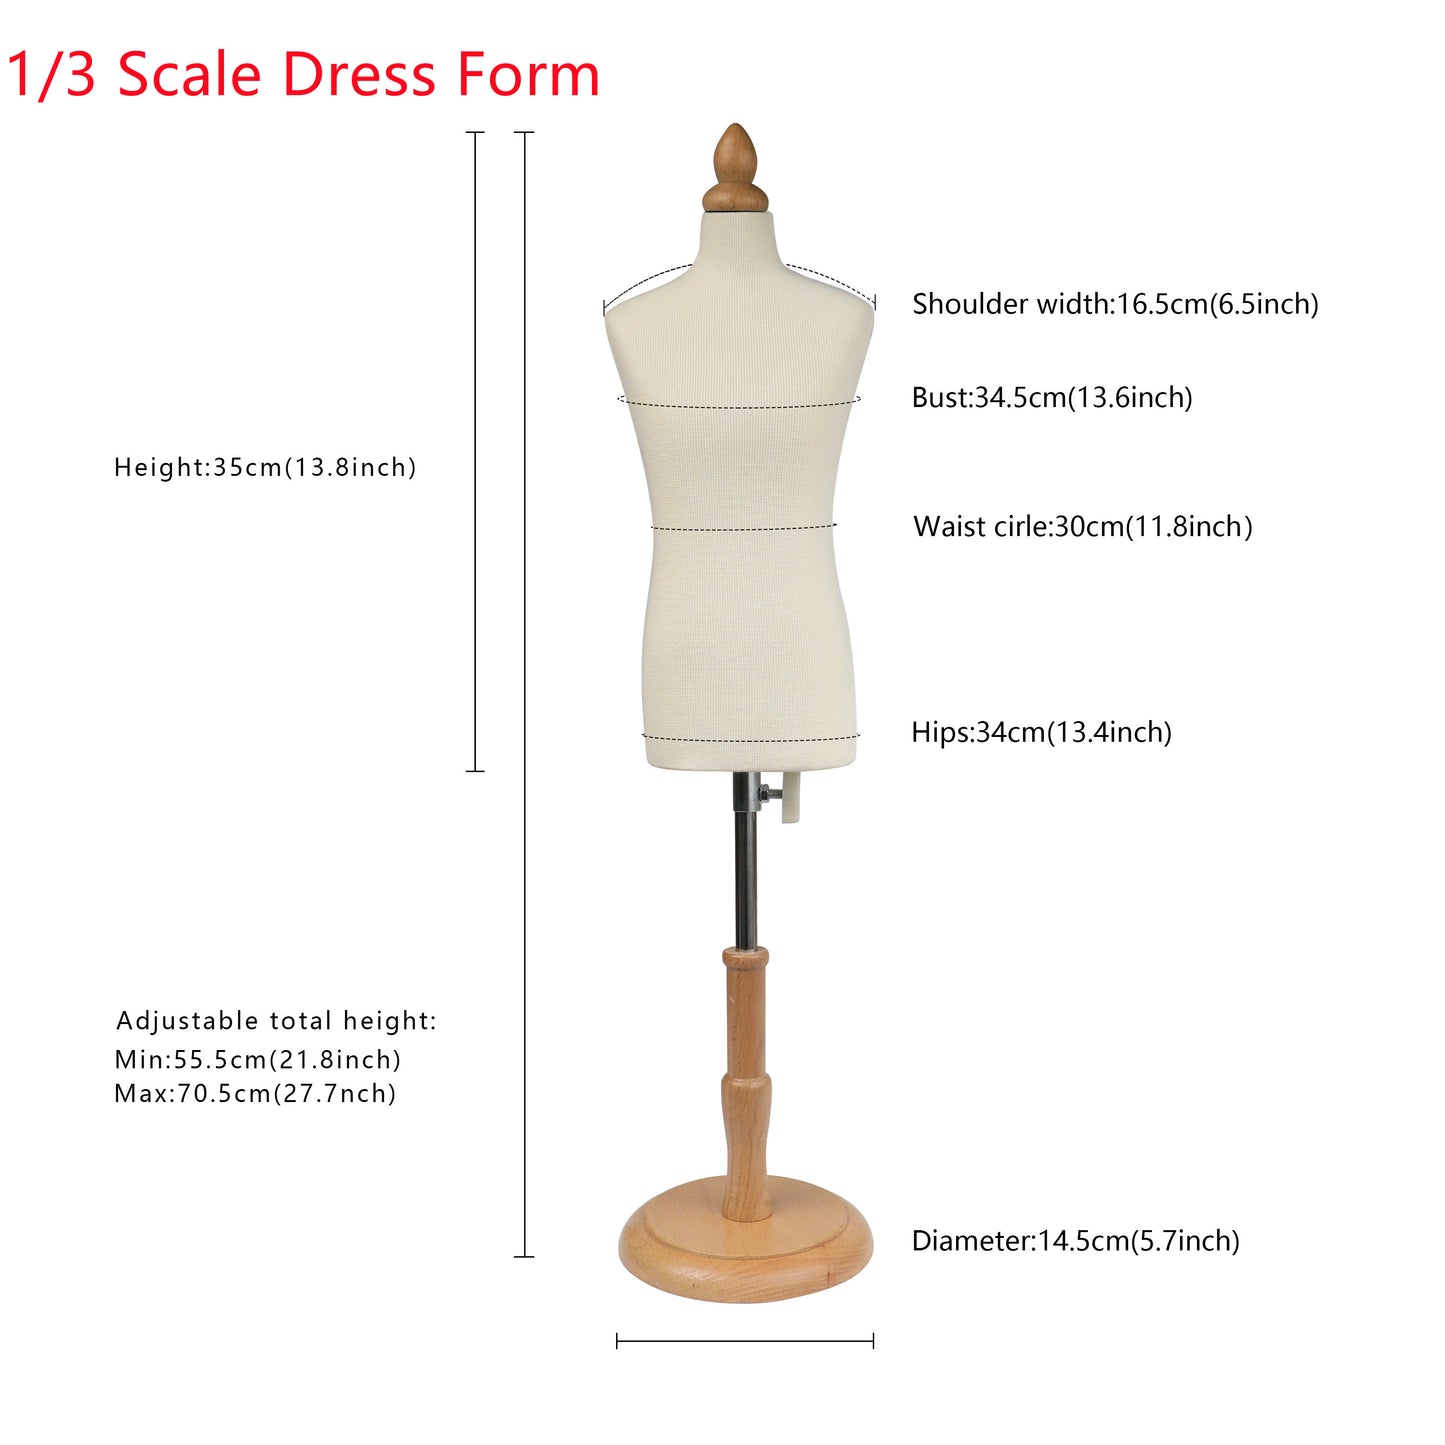 Jelimate Full Pinnable Half Scale Male Dress Form For Pattern Making,1/2 Or 1/3 Or 1/4 Scale Miniature Sewing Mannequin for Men,Mini Tailor Mannequin for Fashion Designer Fashion School